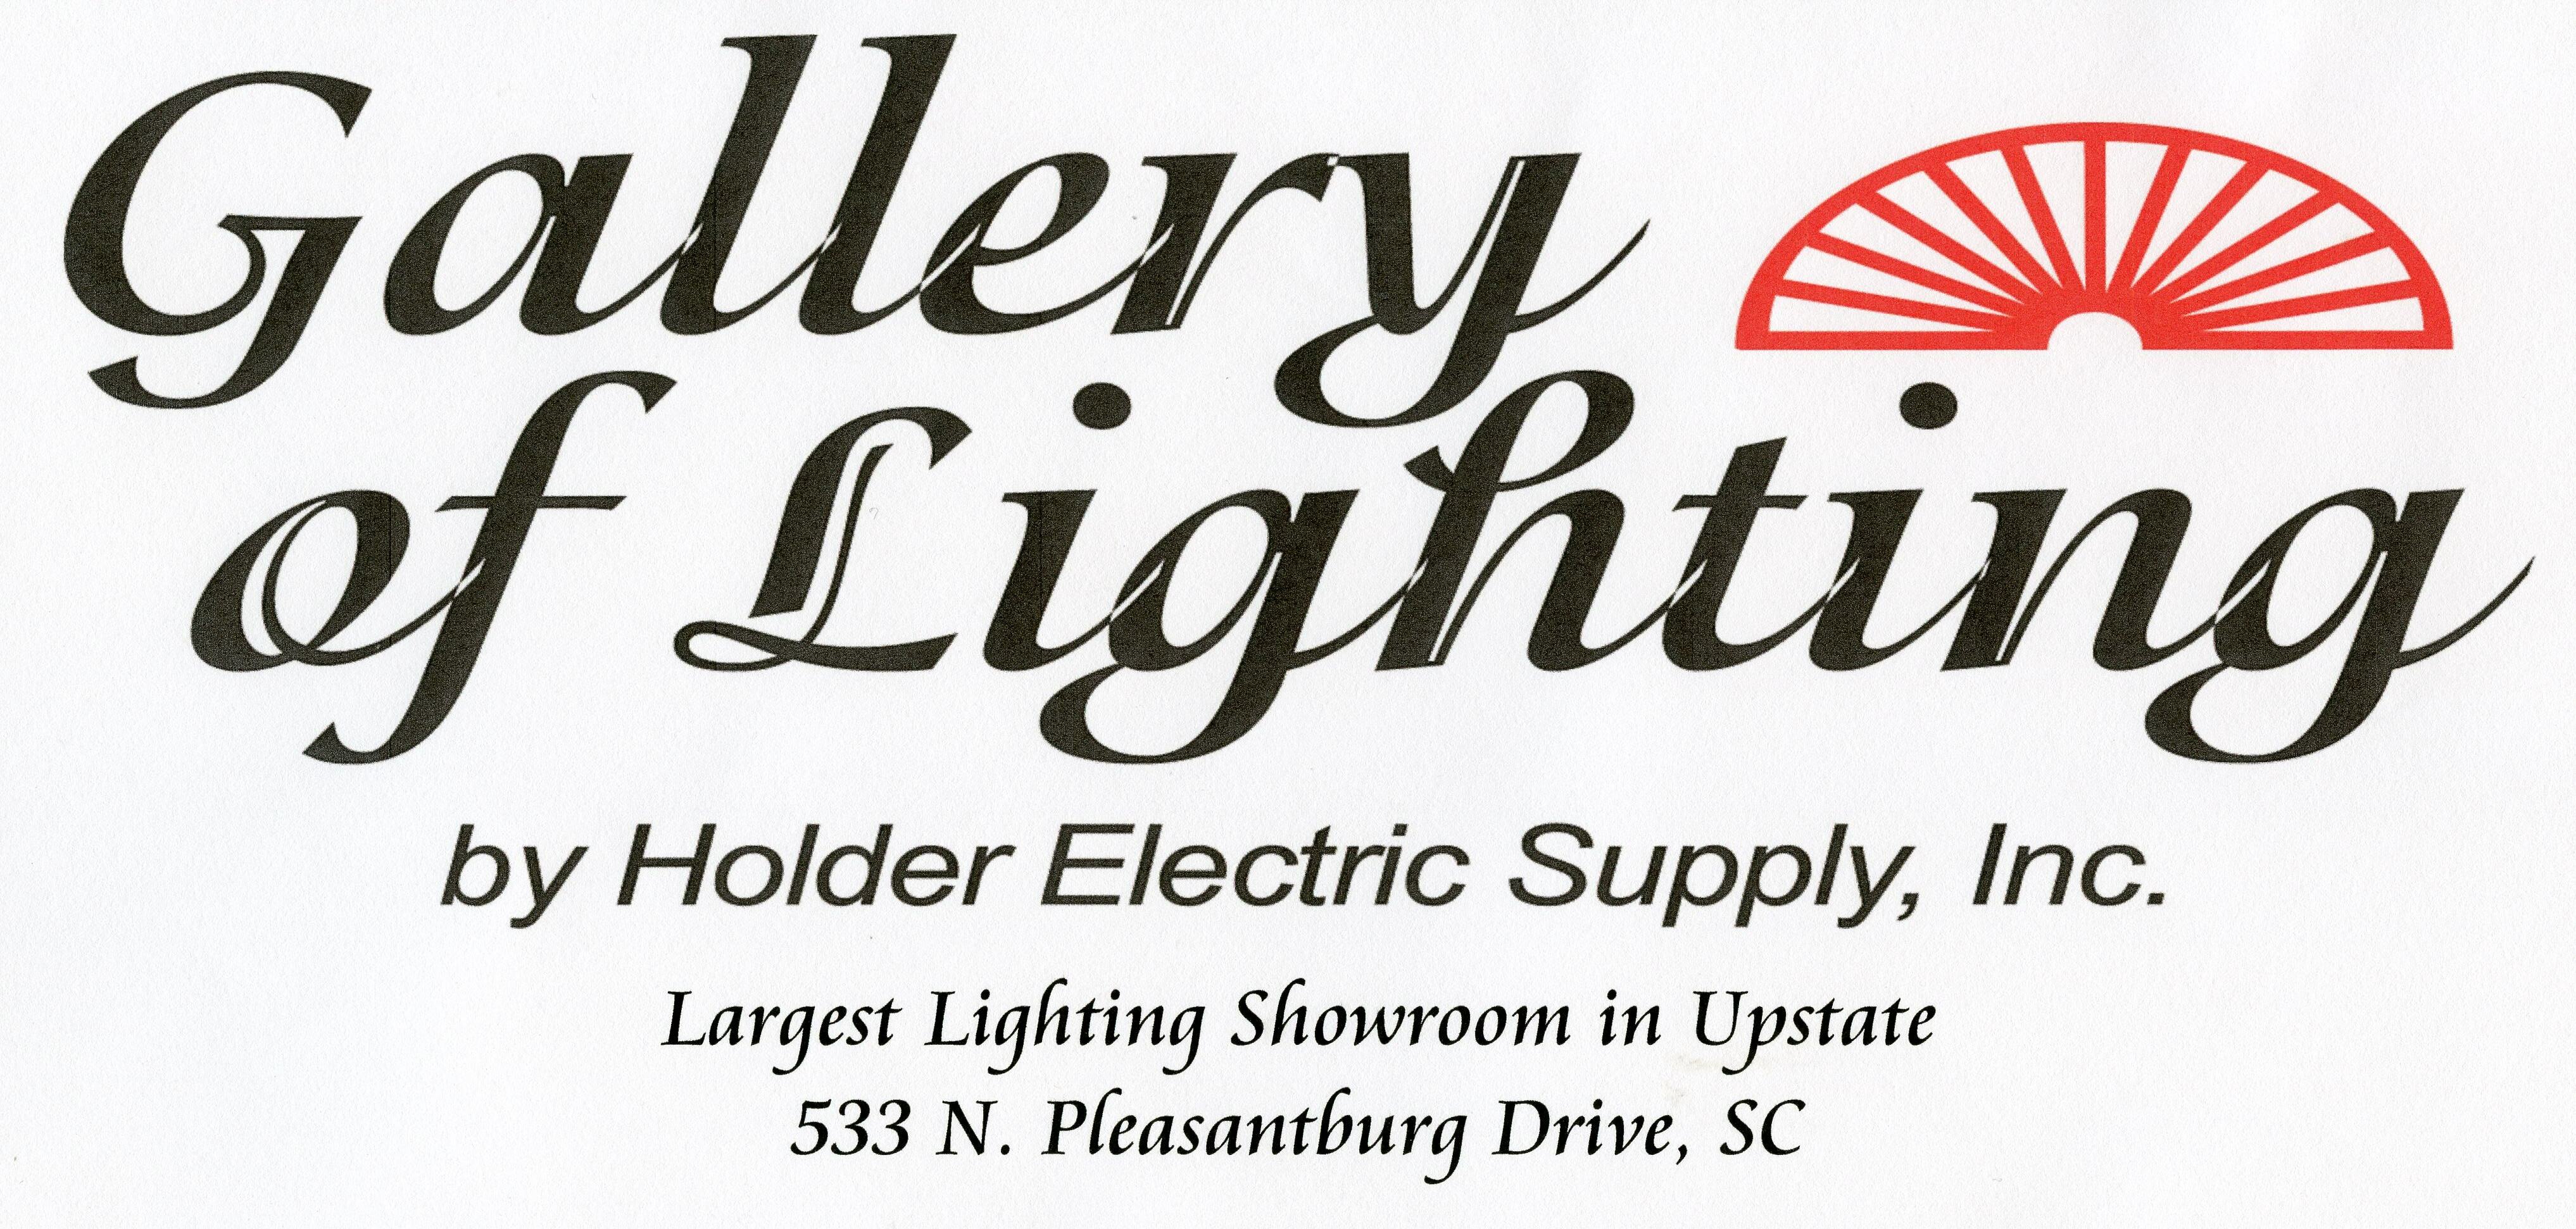 Holder Electric Supply